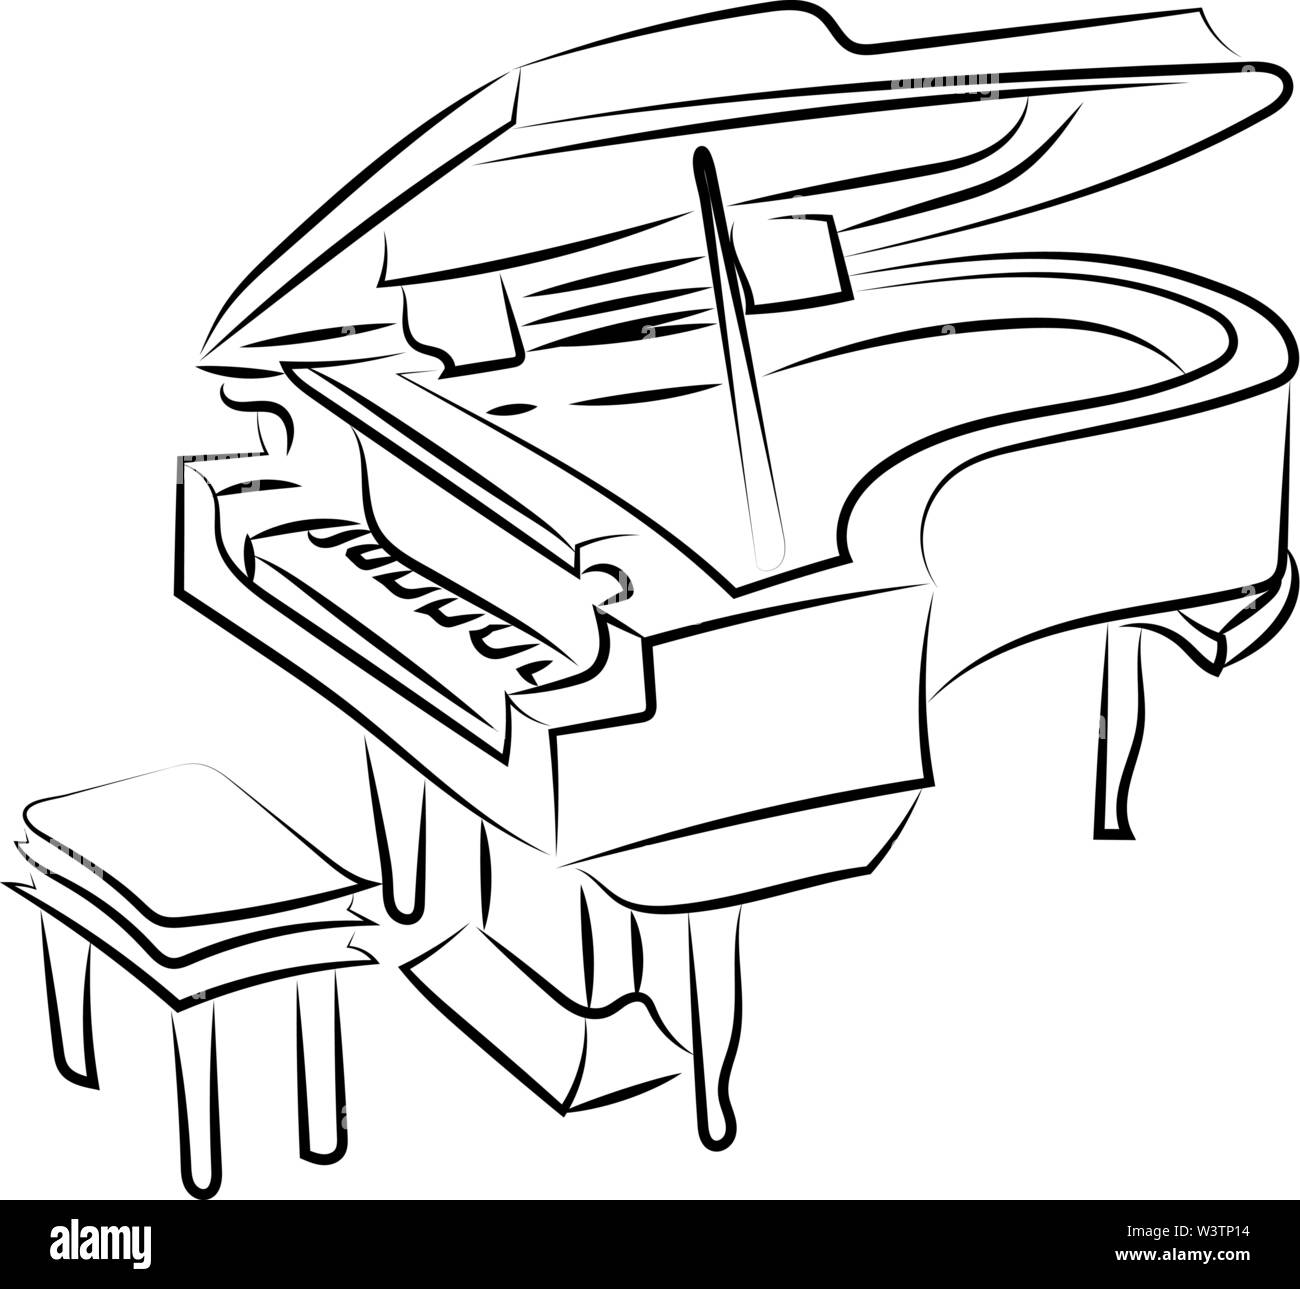 Piano sketch, illustration, vector on white background. Stock Vector